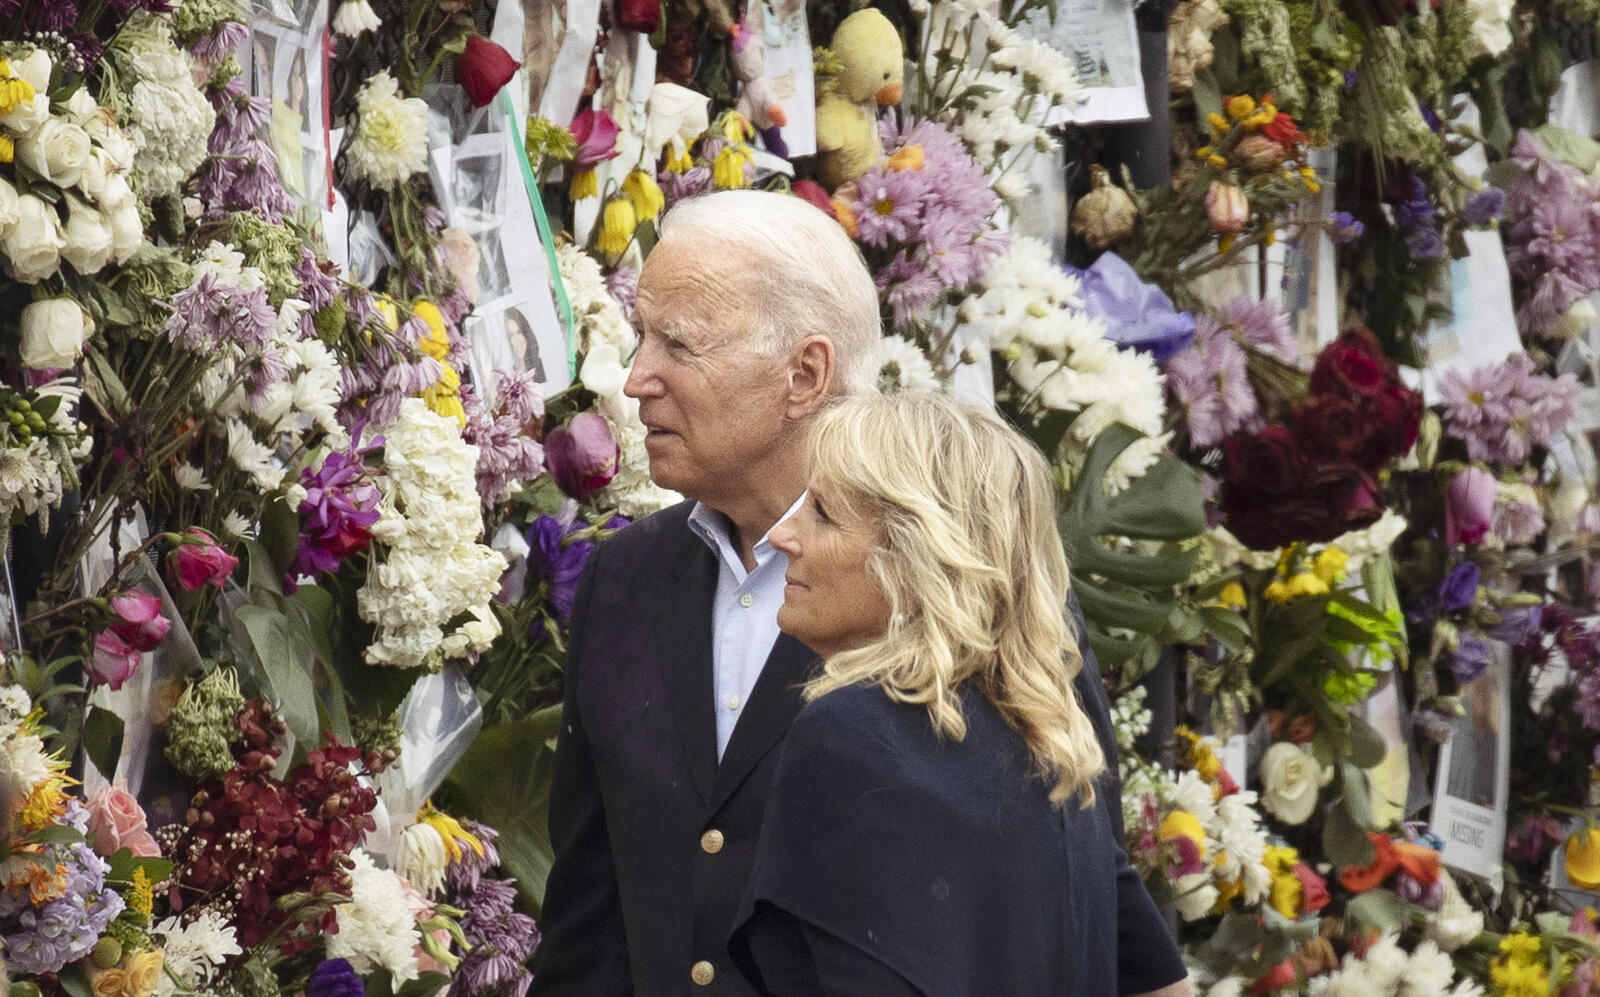 U.S. President Joe Biden and first lady Jill Biden in Surfside at a memorial for people lost since the partial collapse of the Champlain Towers South condo building (Getty)